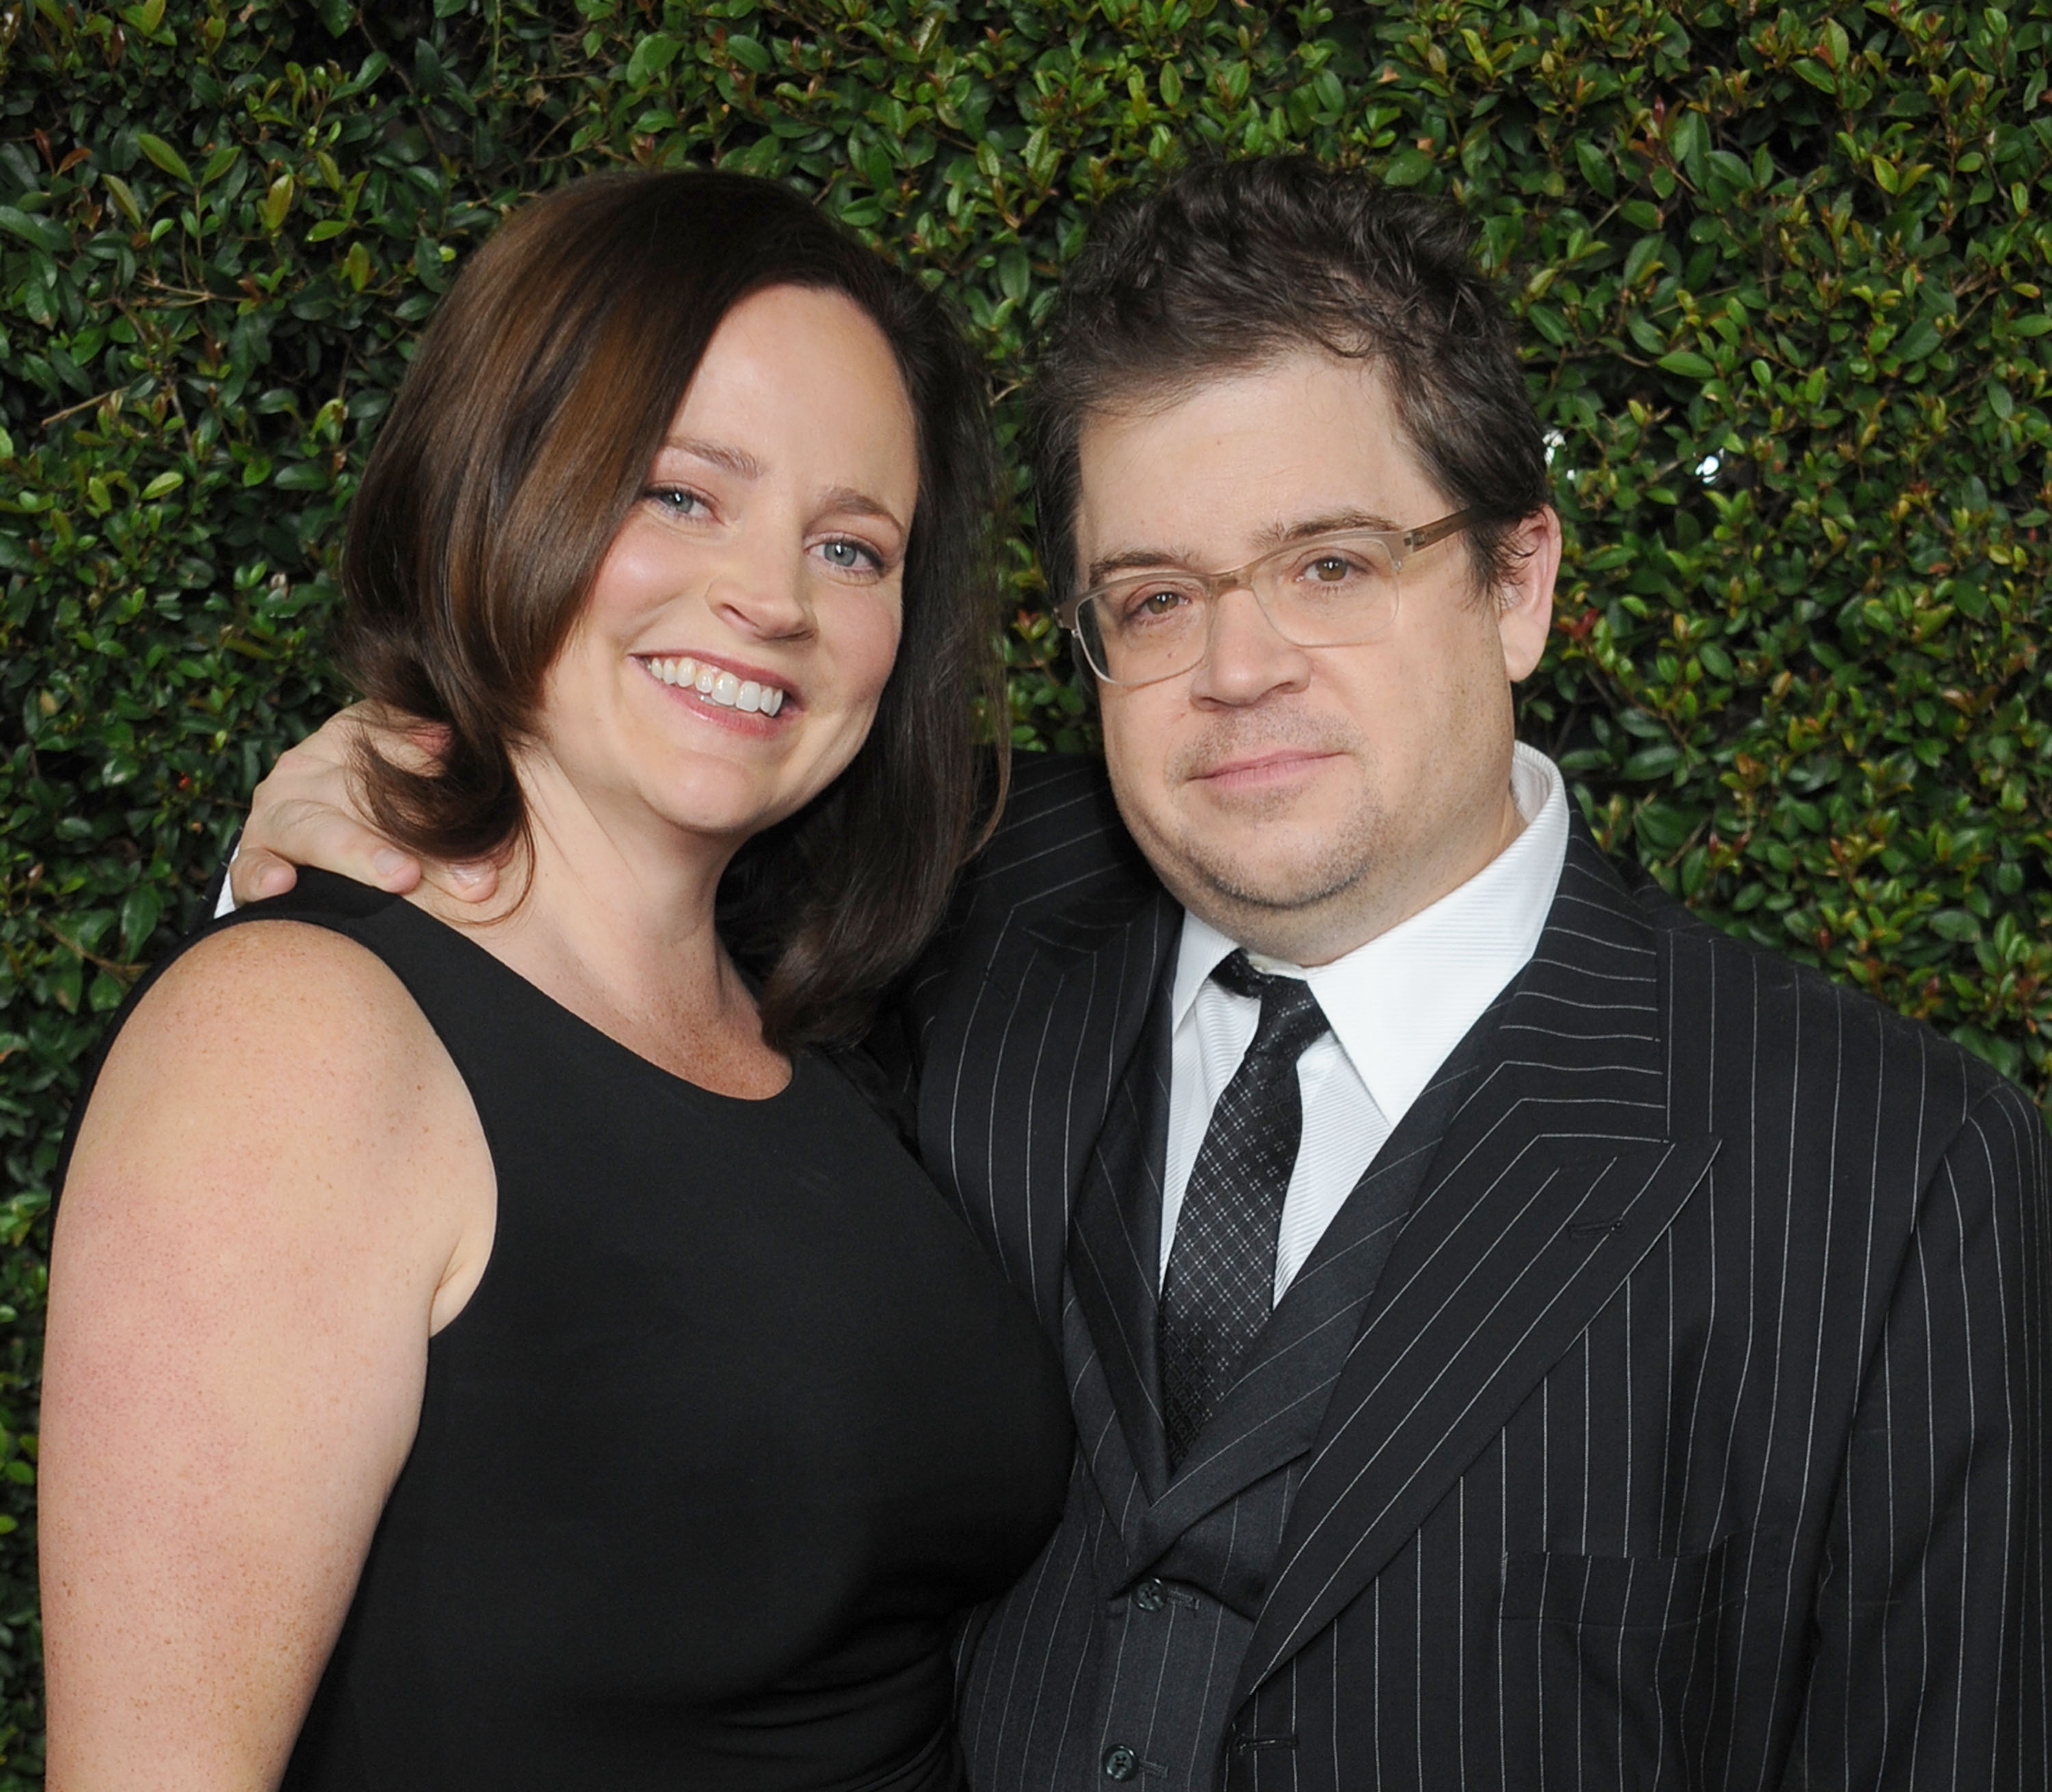 Michelle McNamara’s Story of a Terrifying, Unknown Serial Killer is a True Crime Masterwork